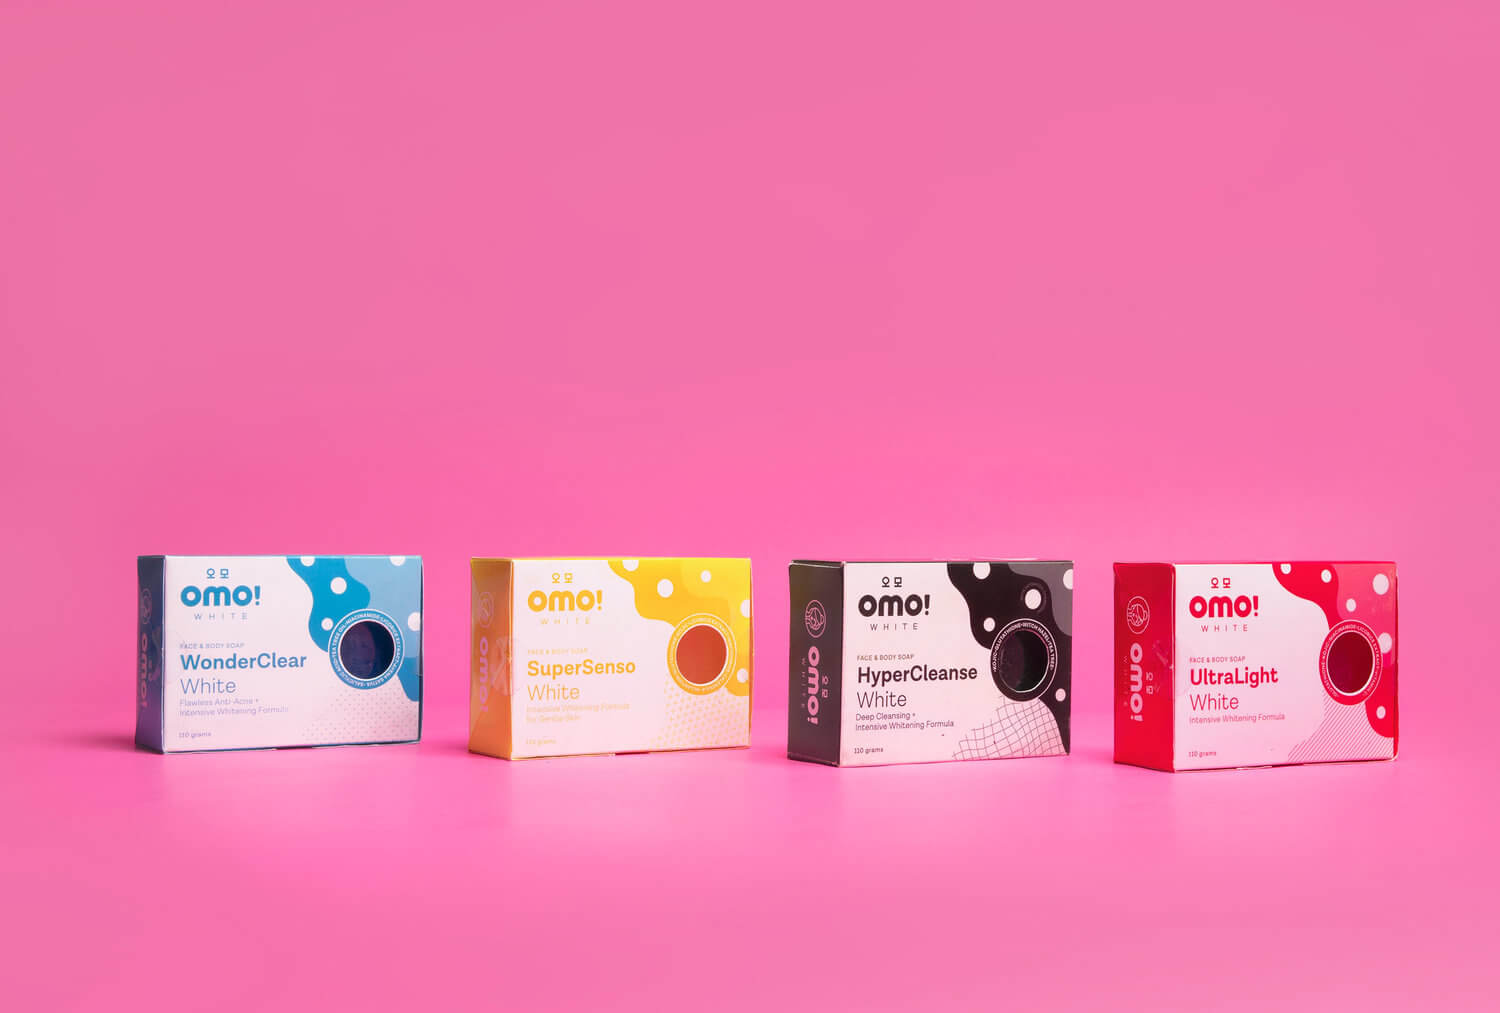 Cute and fun soap box packaging design for beauty and skincare brand Omo! White